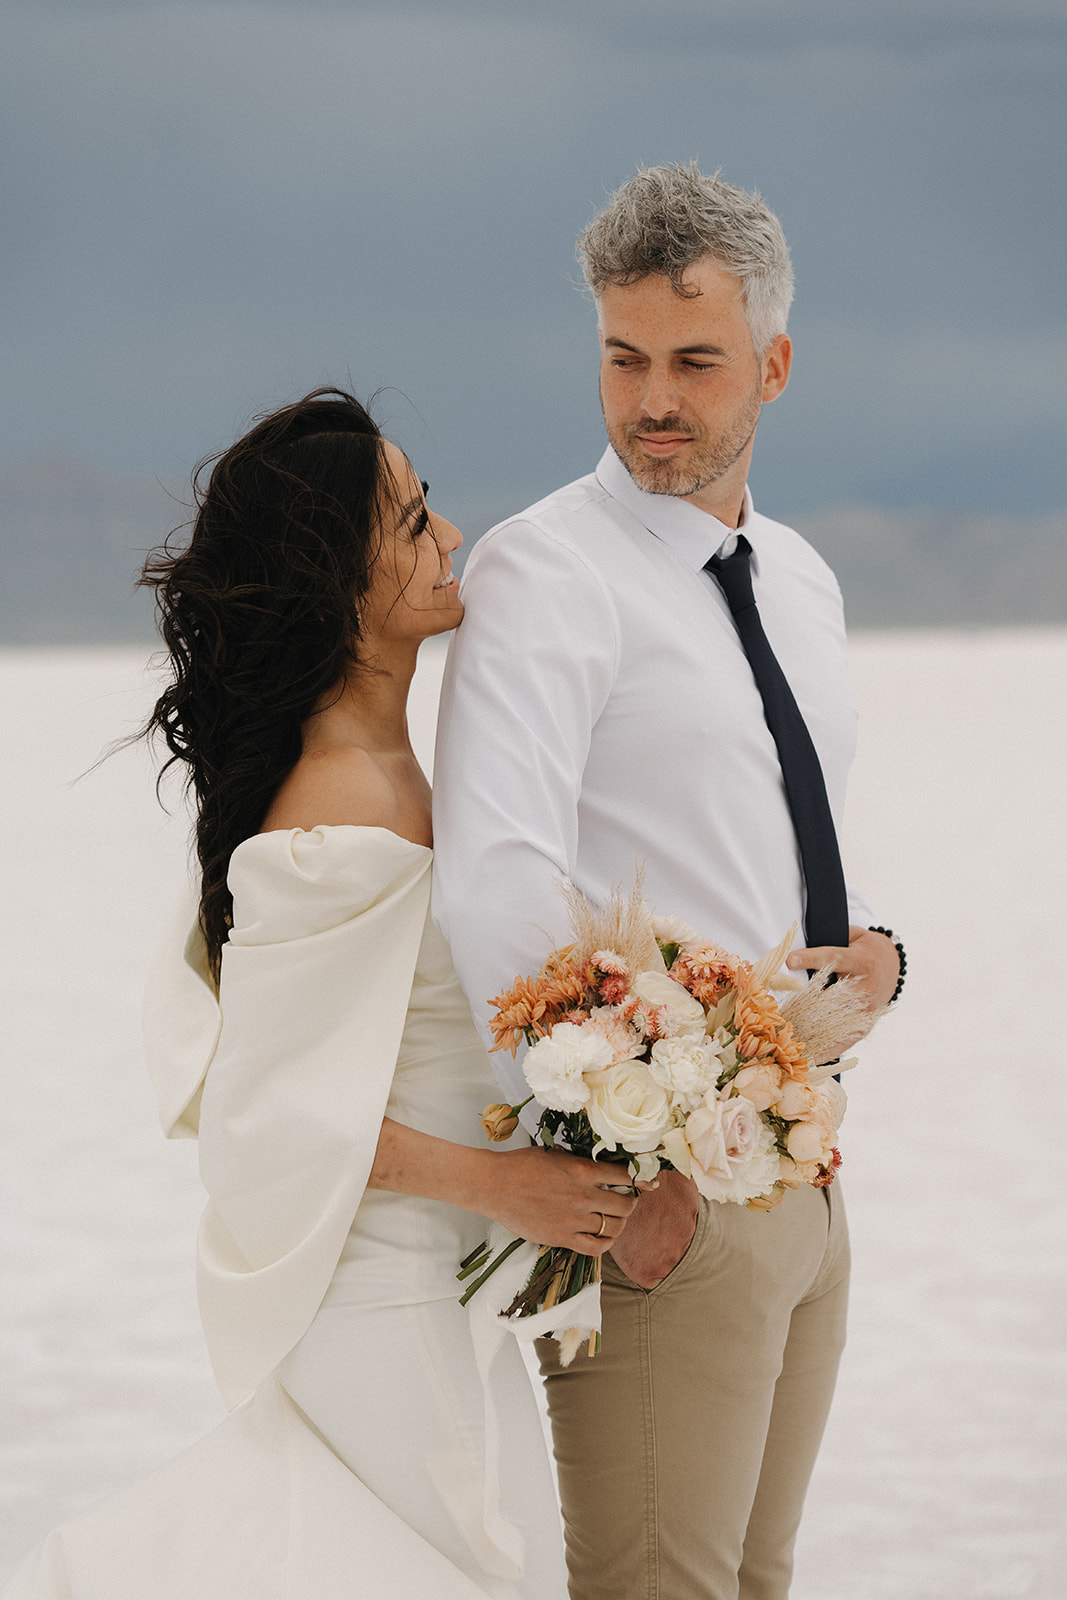 Newlyweds stand together holding each other and a colorful bouquet during their Salt Flats Elopement